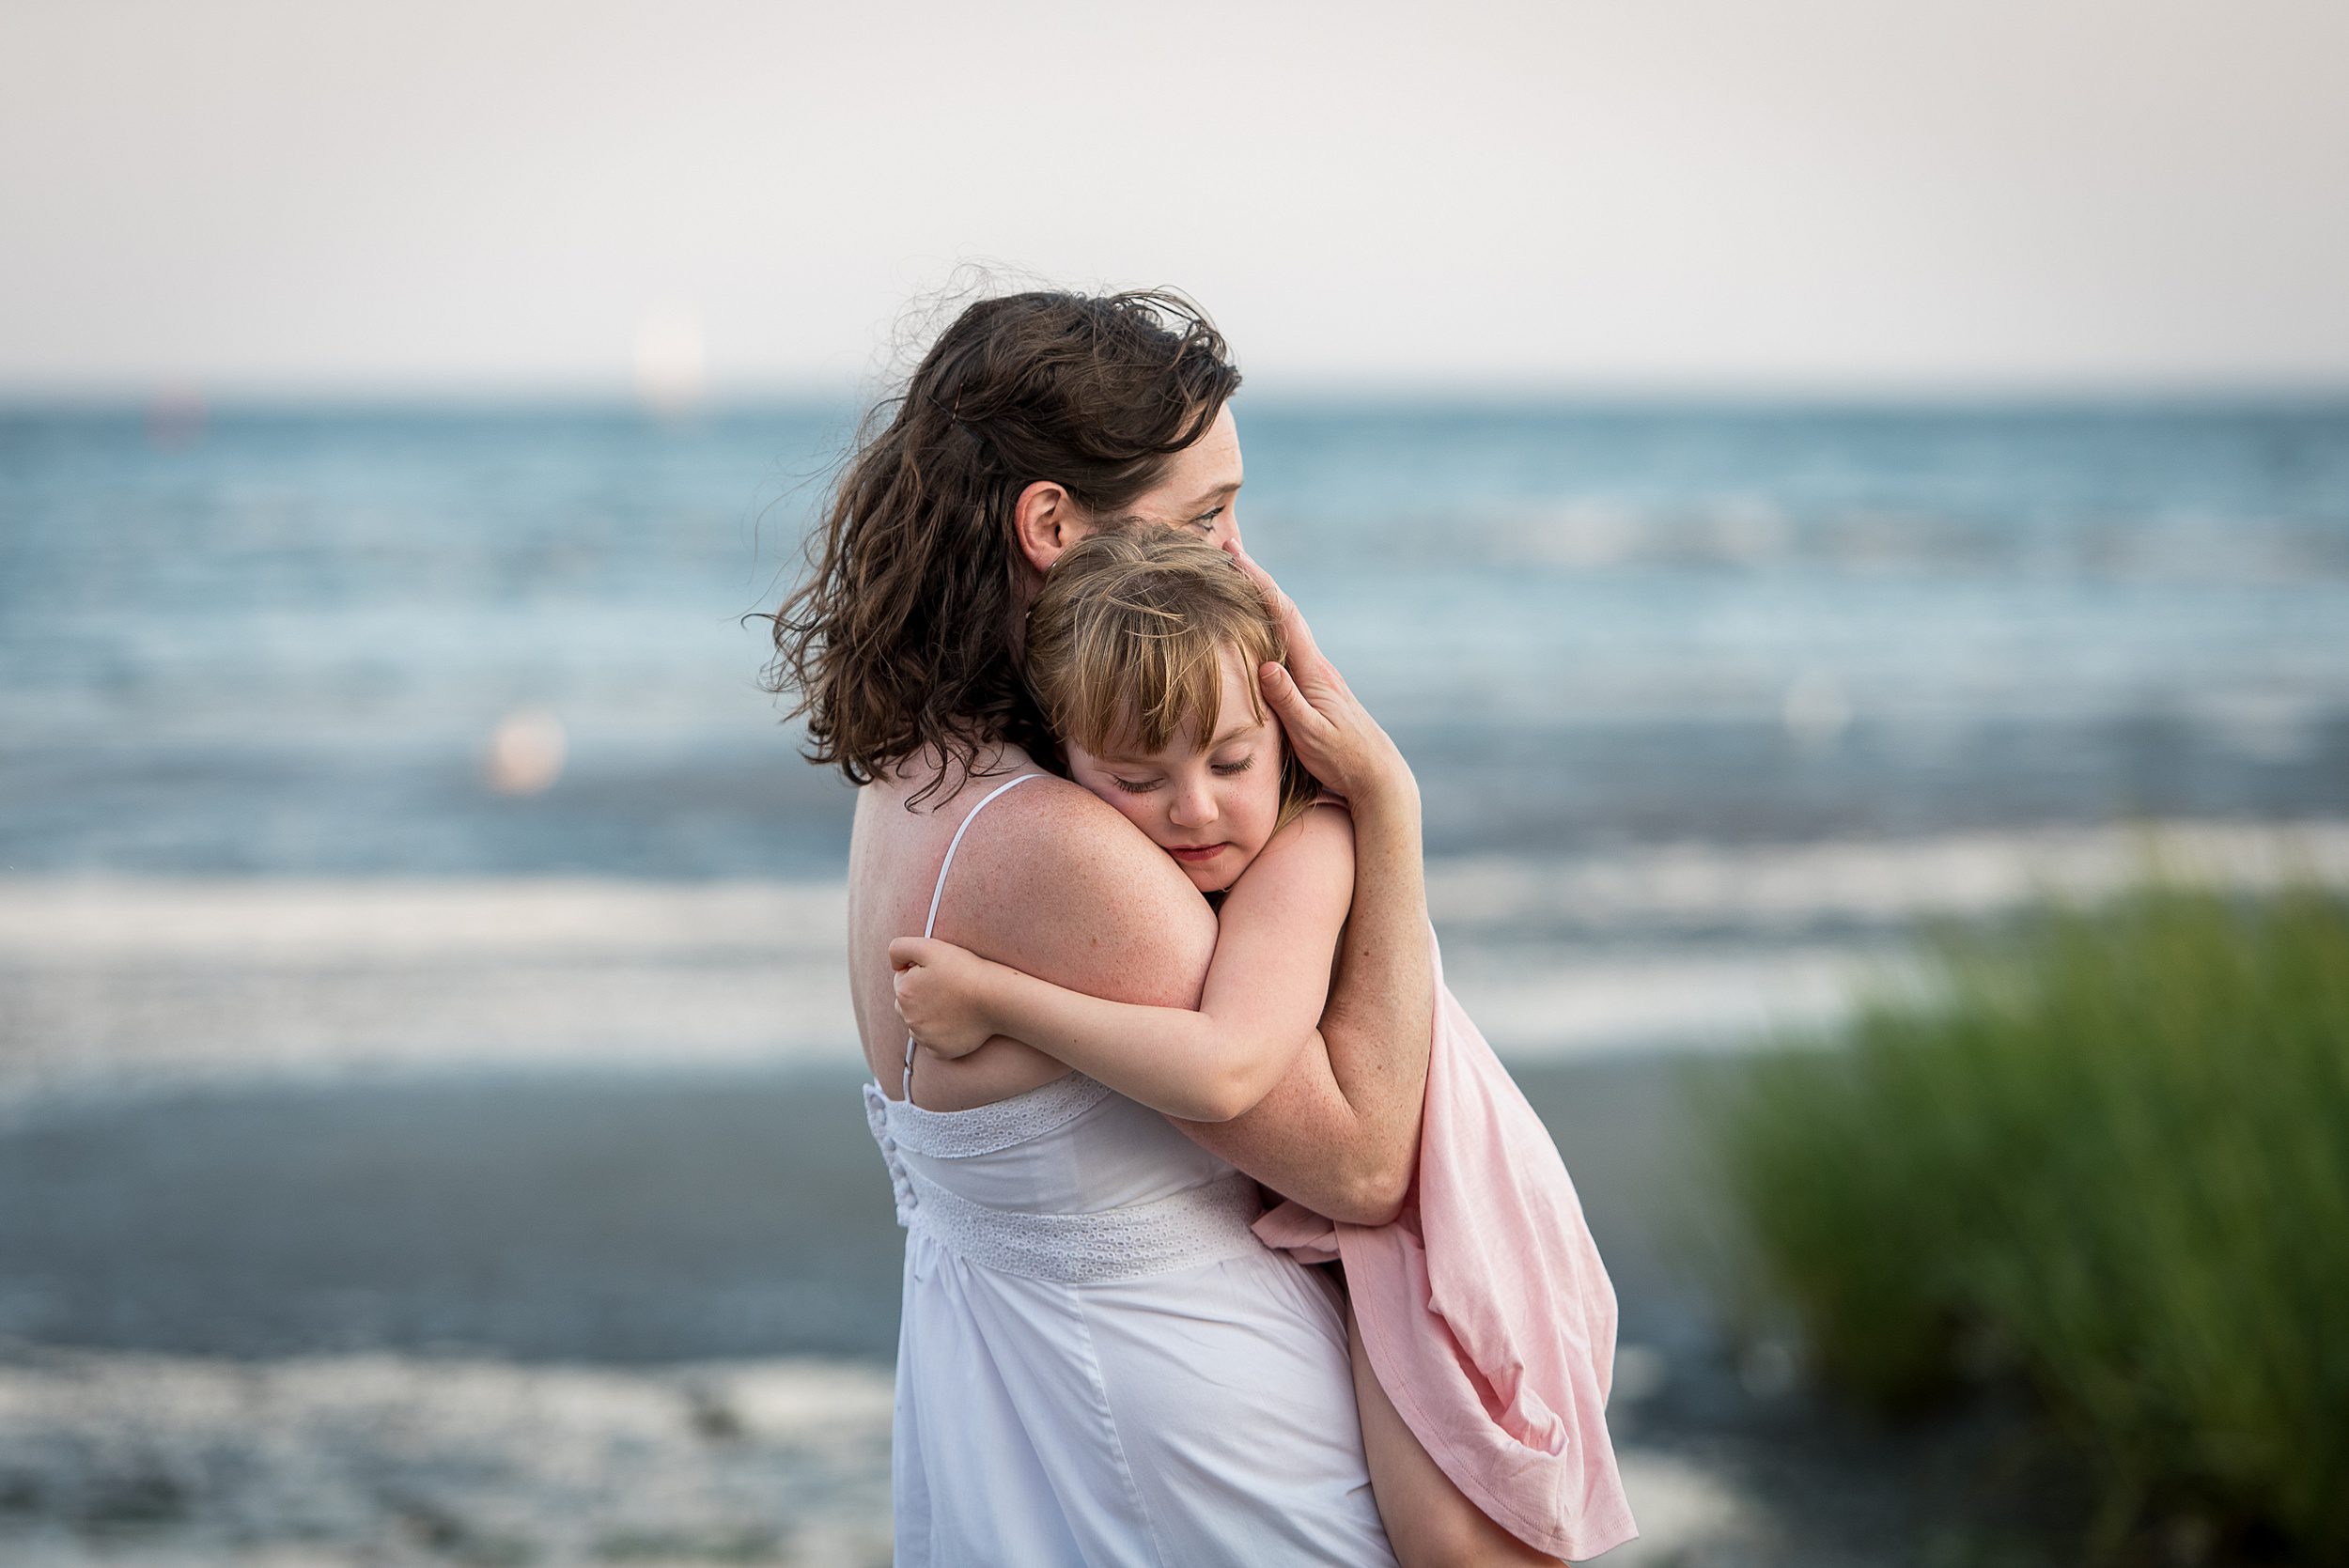 A mother stands on a beach in a white dress cradling her young daughter hugging onto her in a pink dress at one of the best connecticut beaches for families